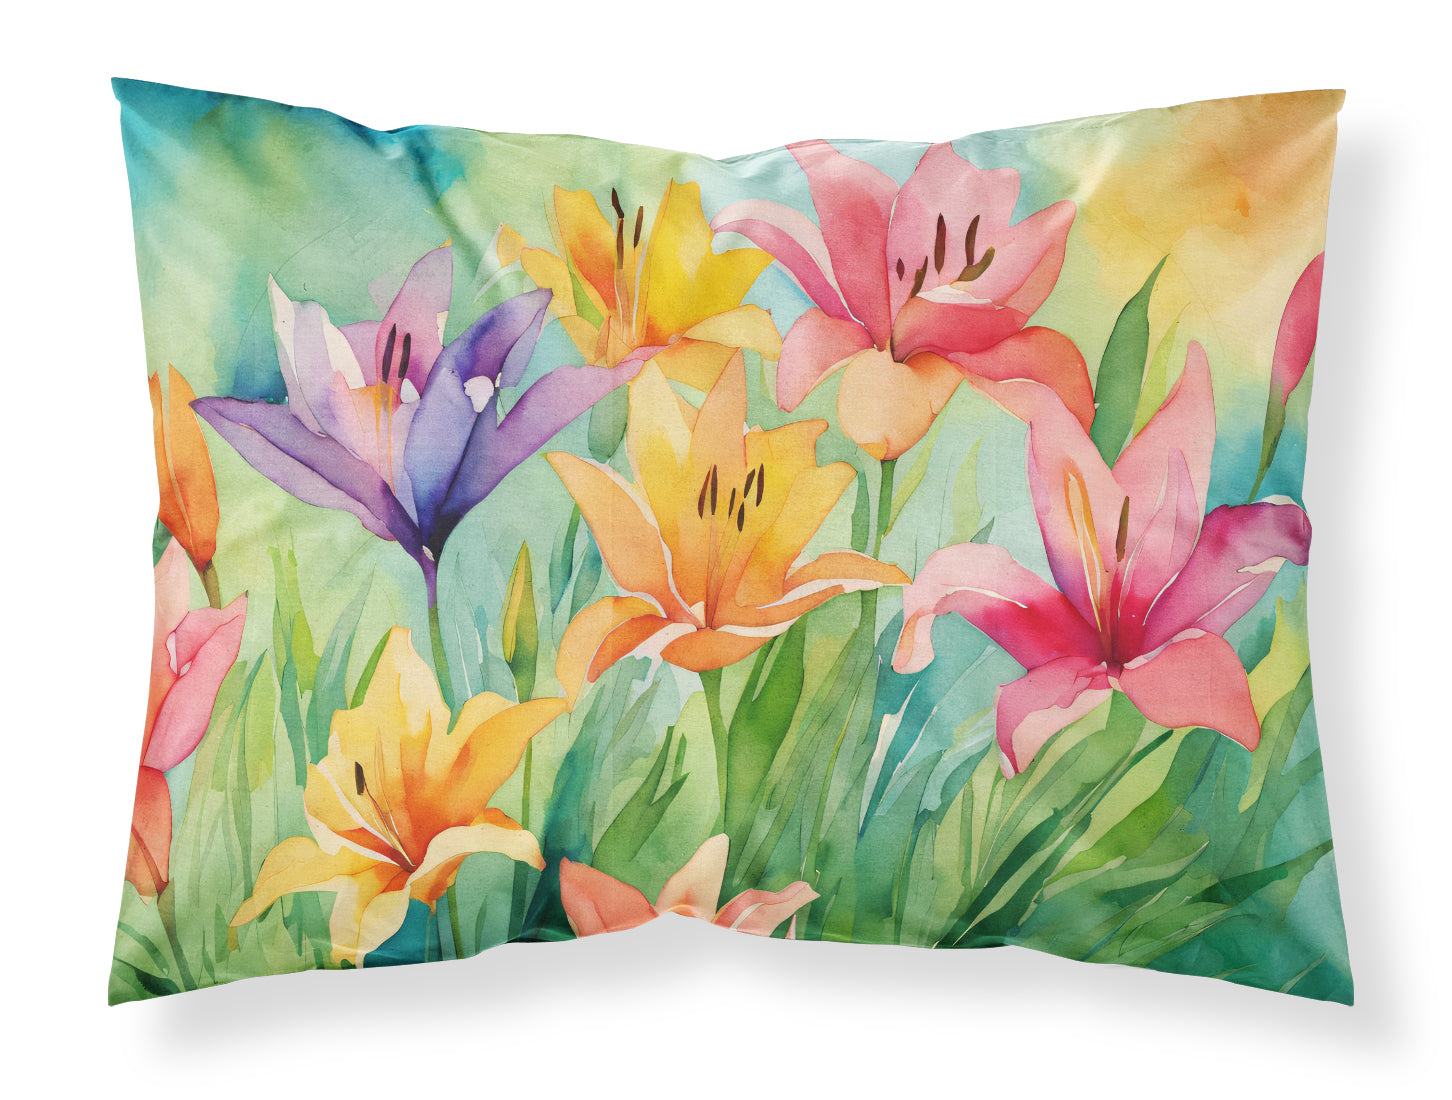 Buy this Lilies in Watercolor Fabric Standard Pillowcase